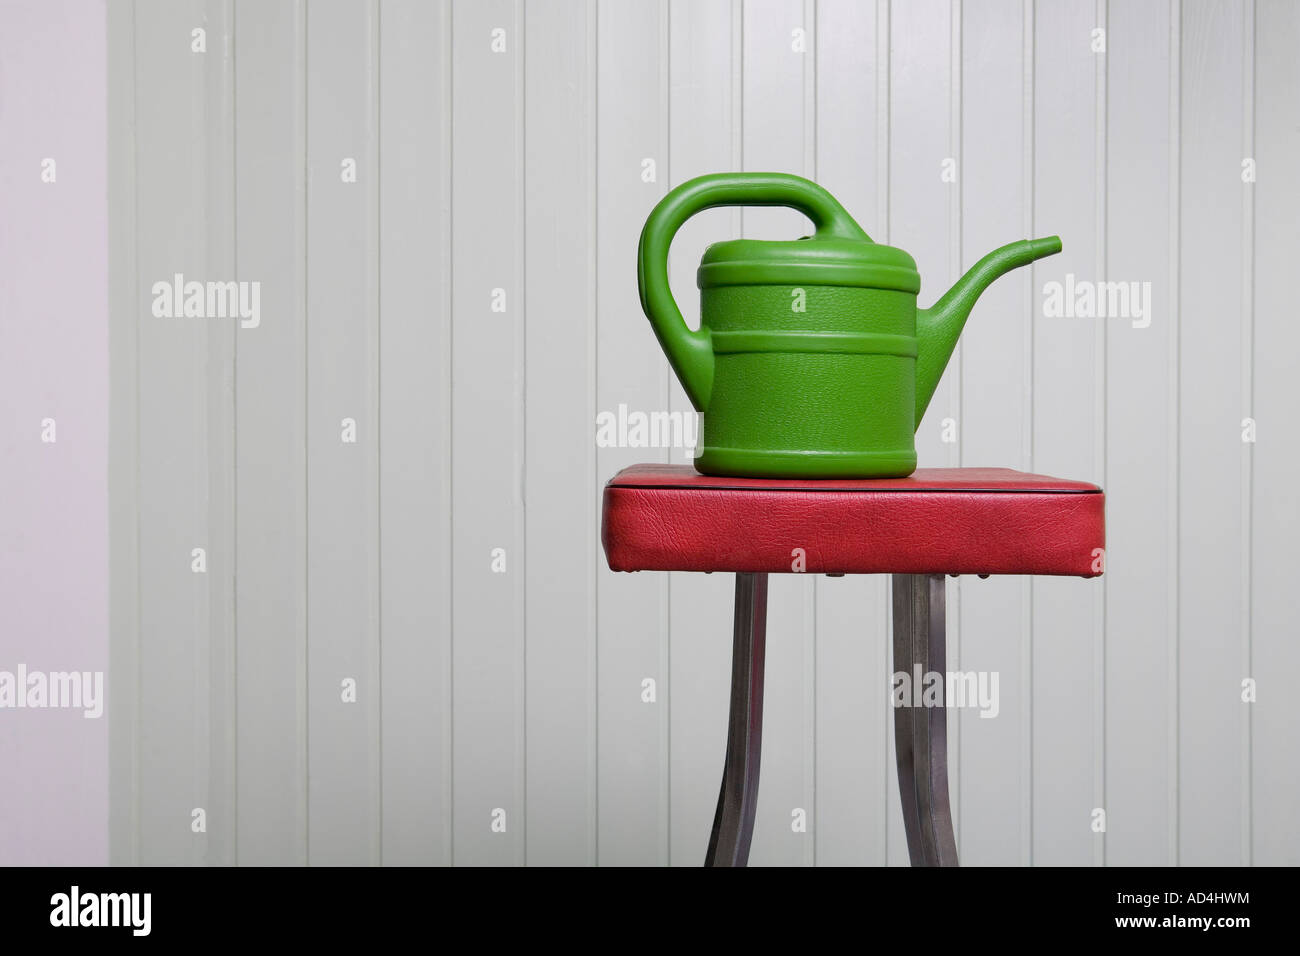 A watering can on a stool Stock Photo